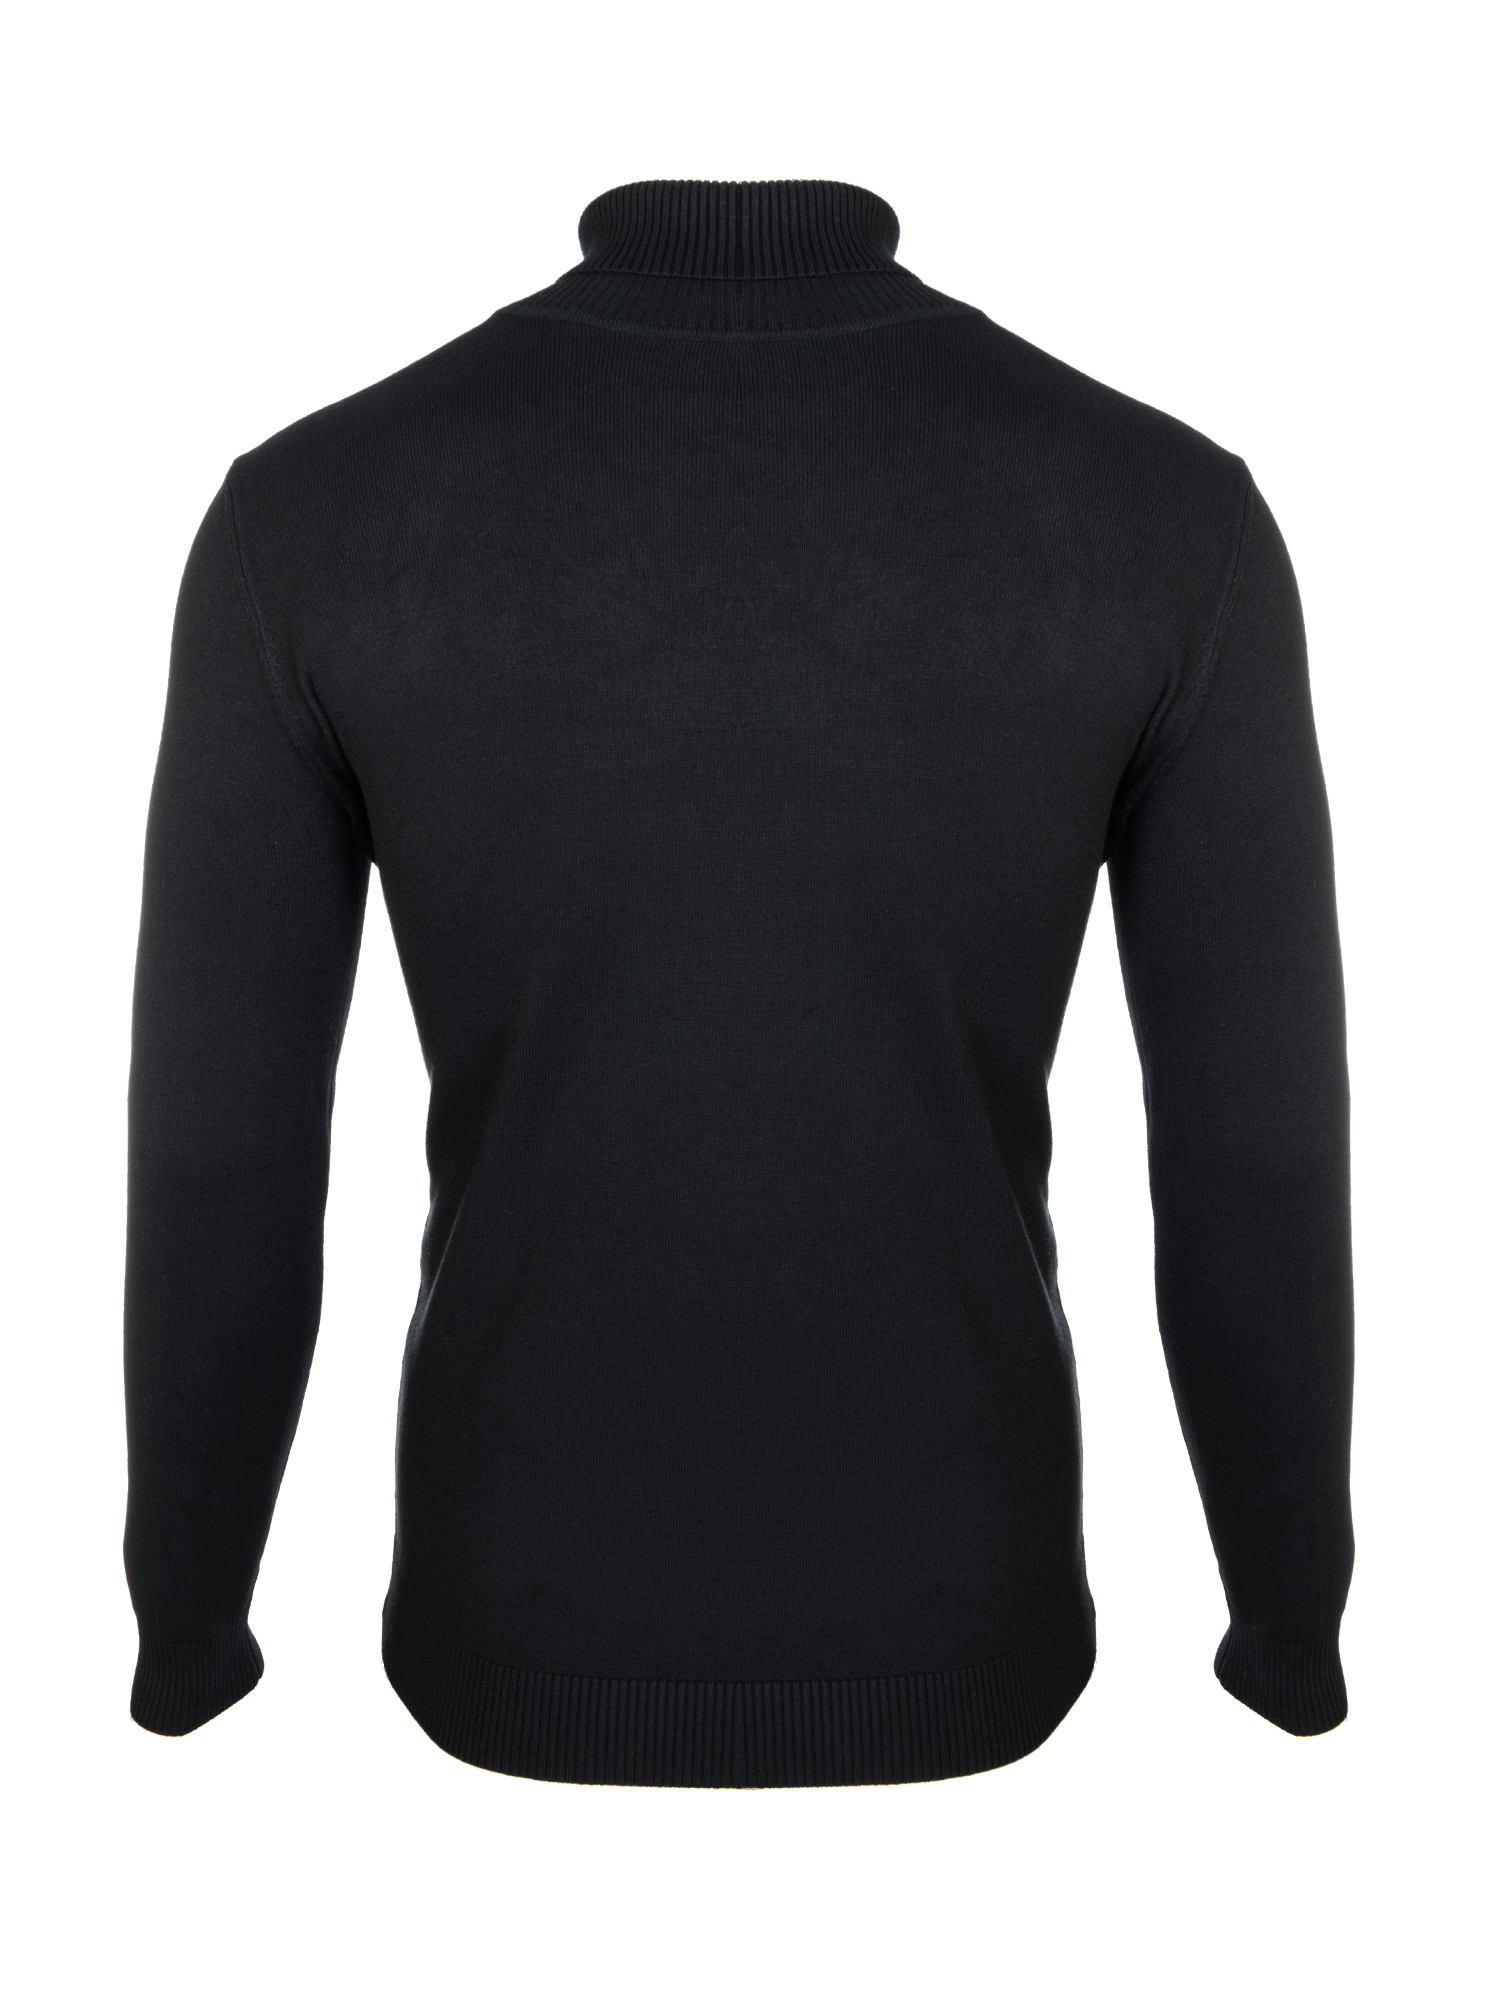 Turtleneck Sweaters for Men's Knitted Pullover Long Sleeve Sweaters Slim Fit Lightweight Sweatshirt Casual Turtle Neck Sweaters - image 4 of 8